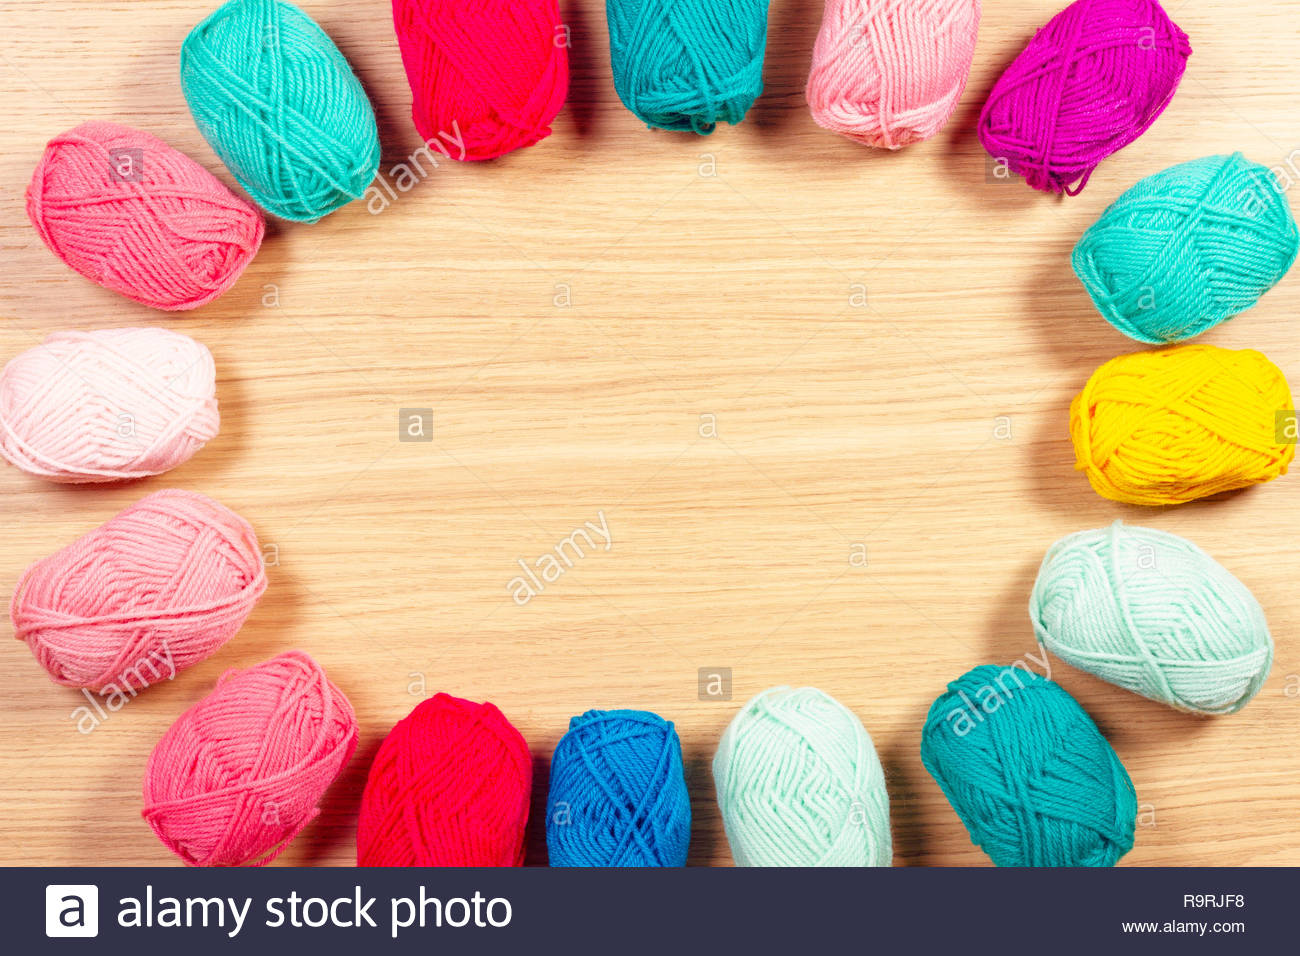 Colorful Yarn For Knitting On Wooden Background Stock Photo